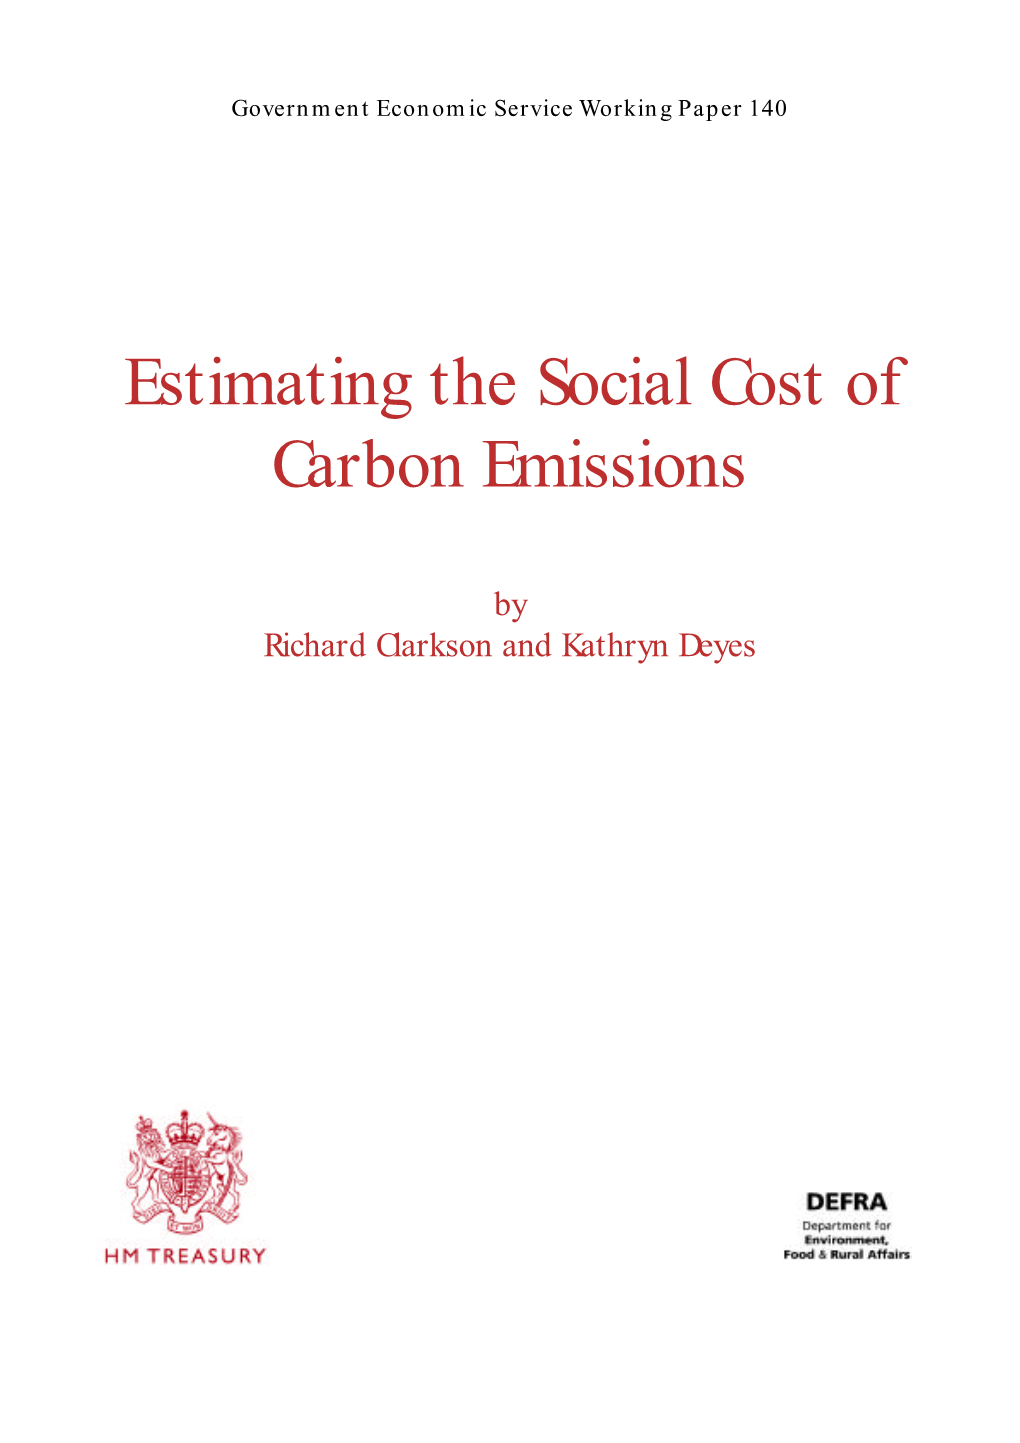 Estimating the Social Cost of Carbon Emissions